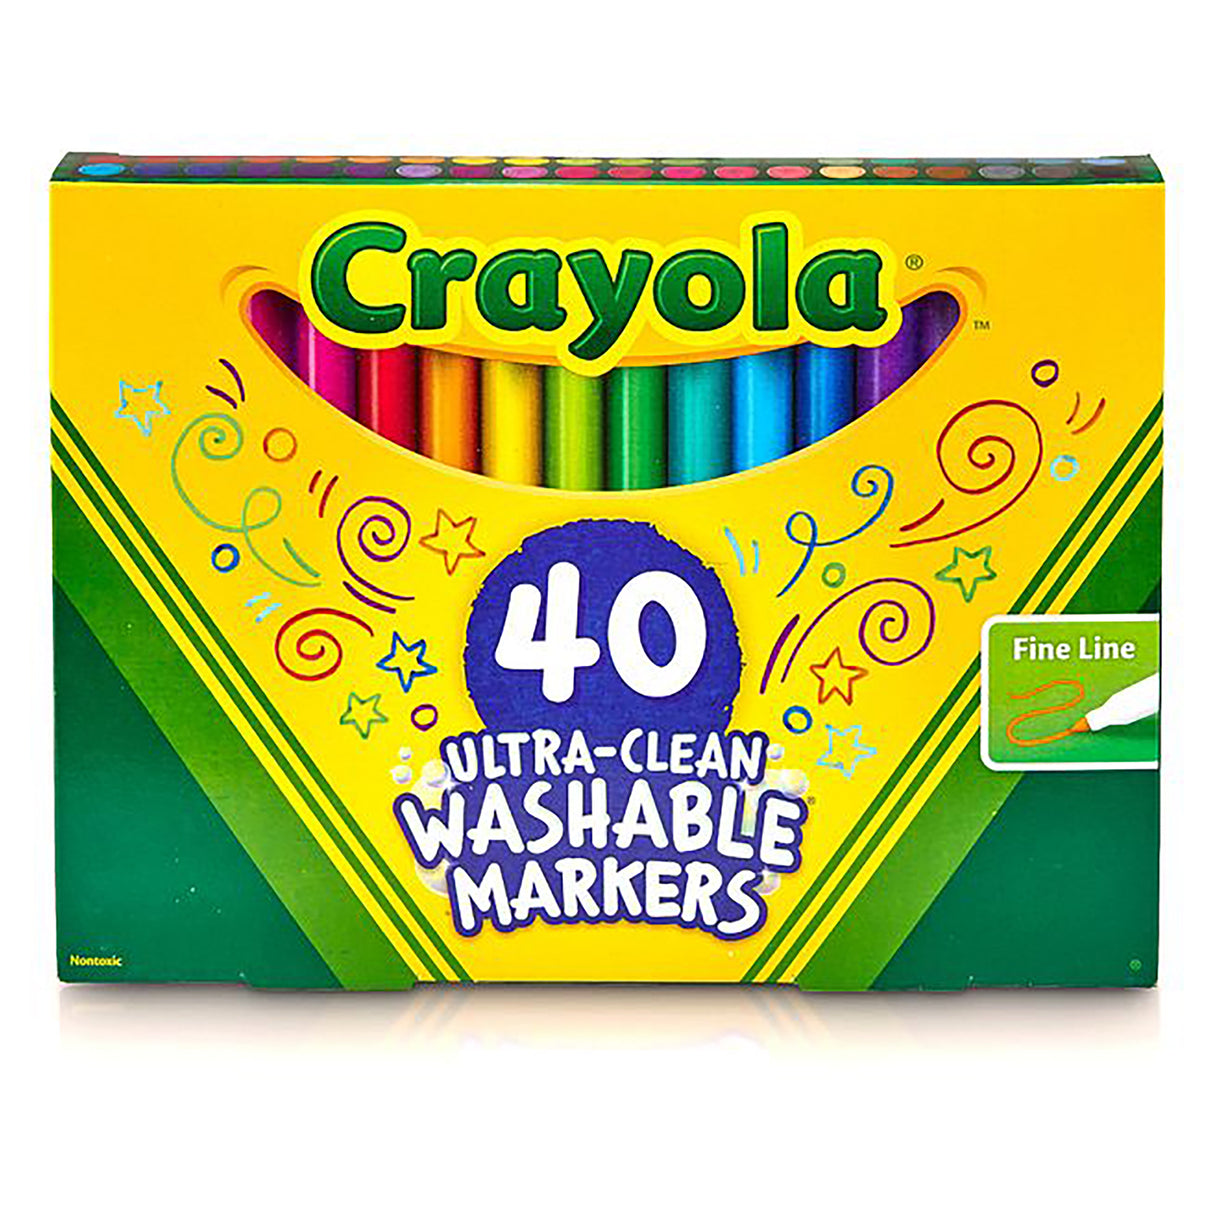 Crayola Fineline Markers (Pack of 40)